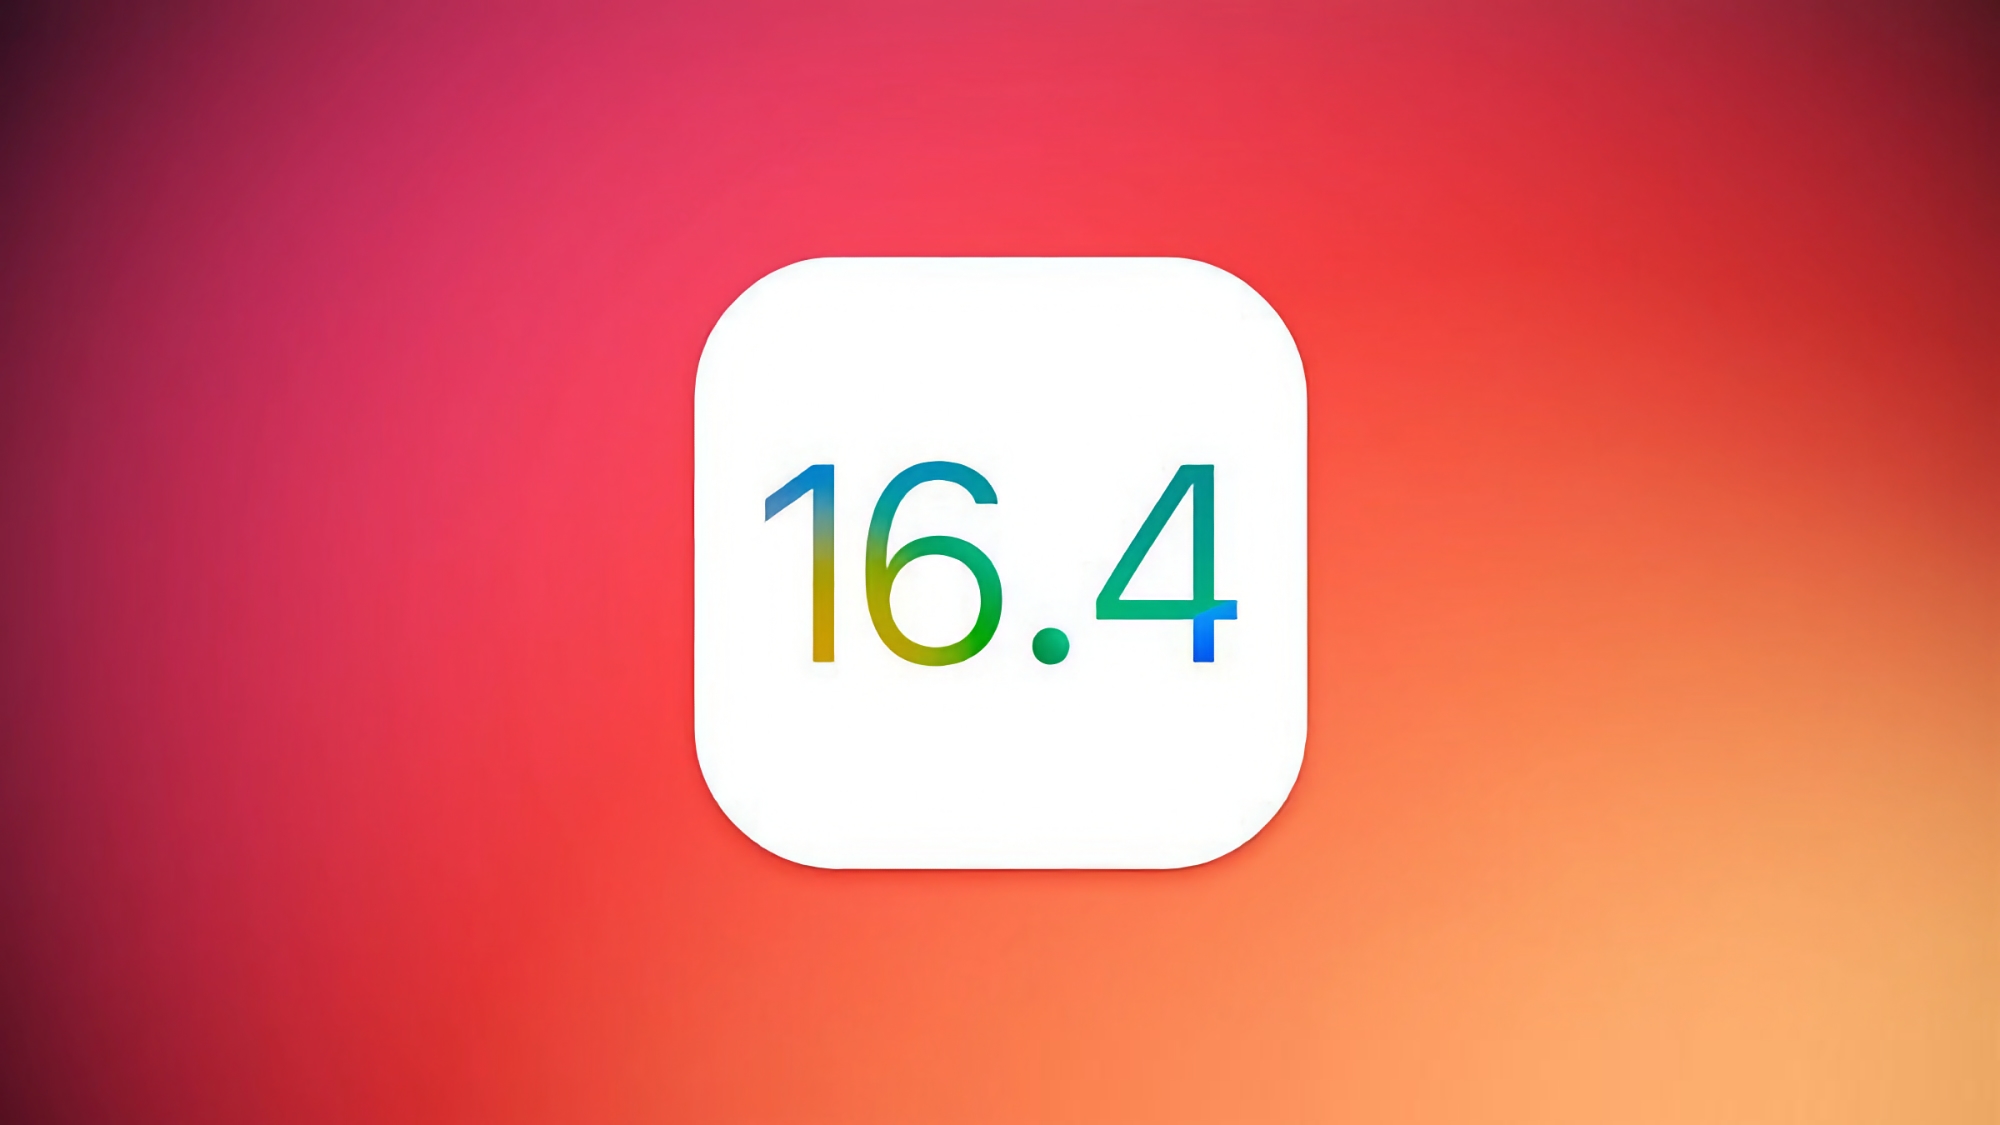 Apple releases iOS 16.4 Beta 2: What's new